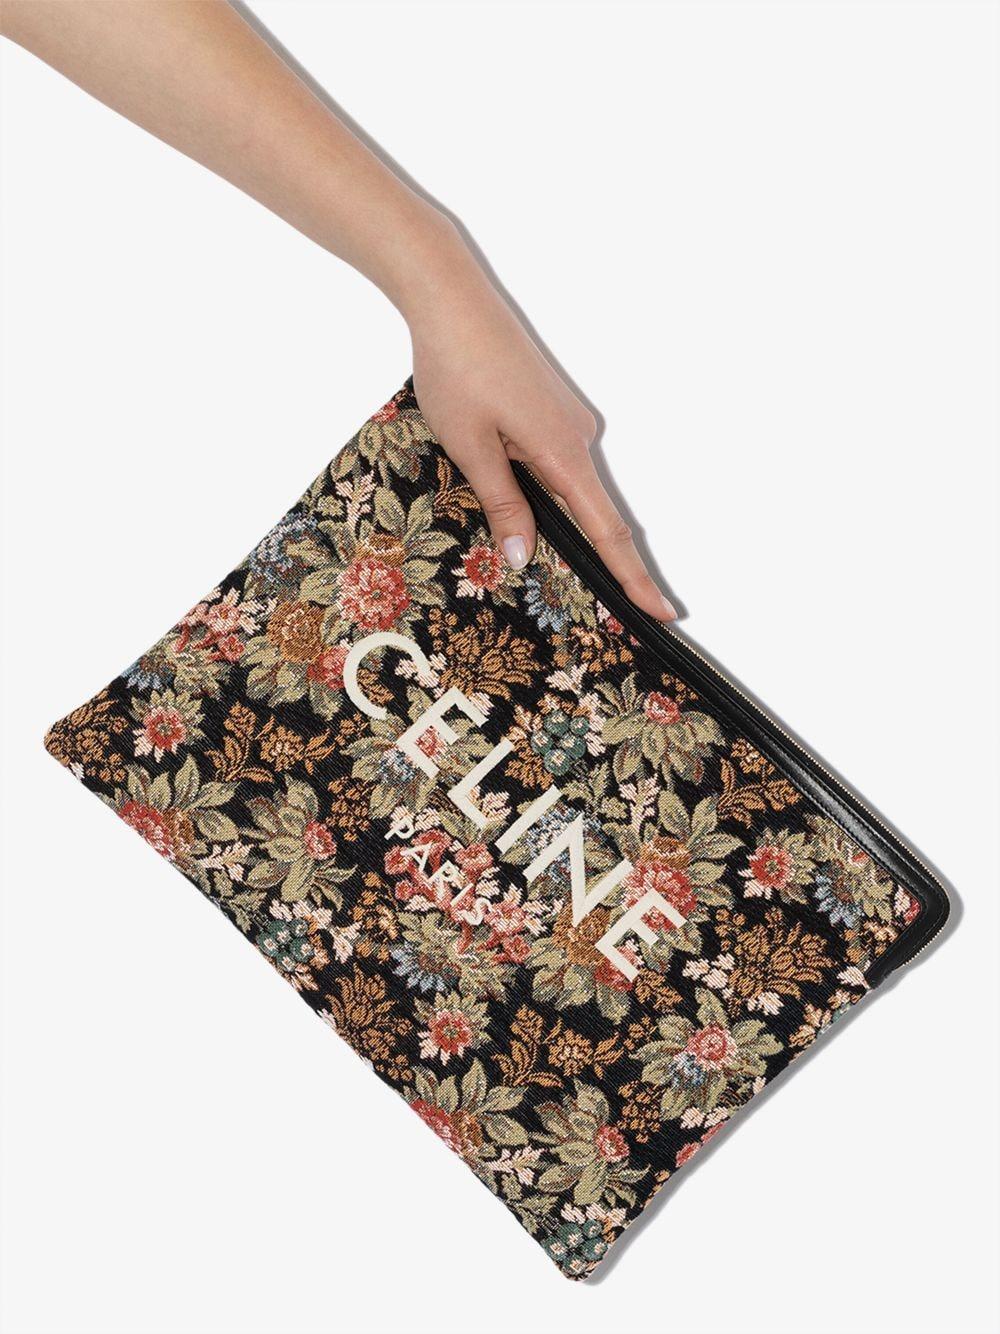 Celine Multicoloured Floral Tapestry Cotton Logo Clutch in Black - Lyst